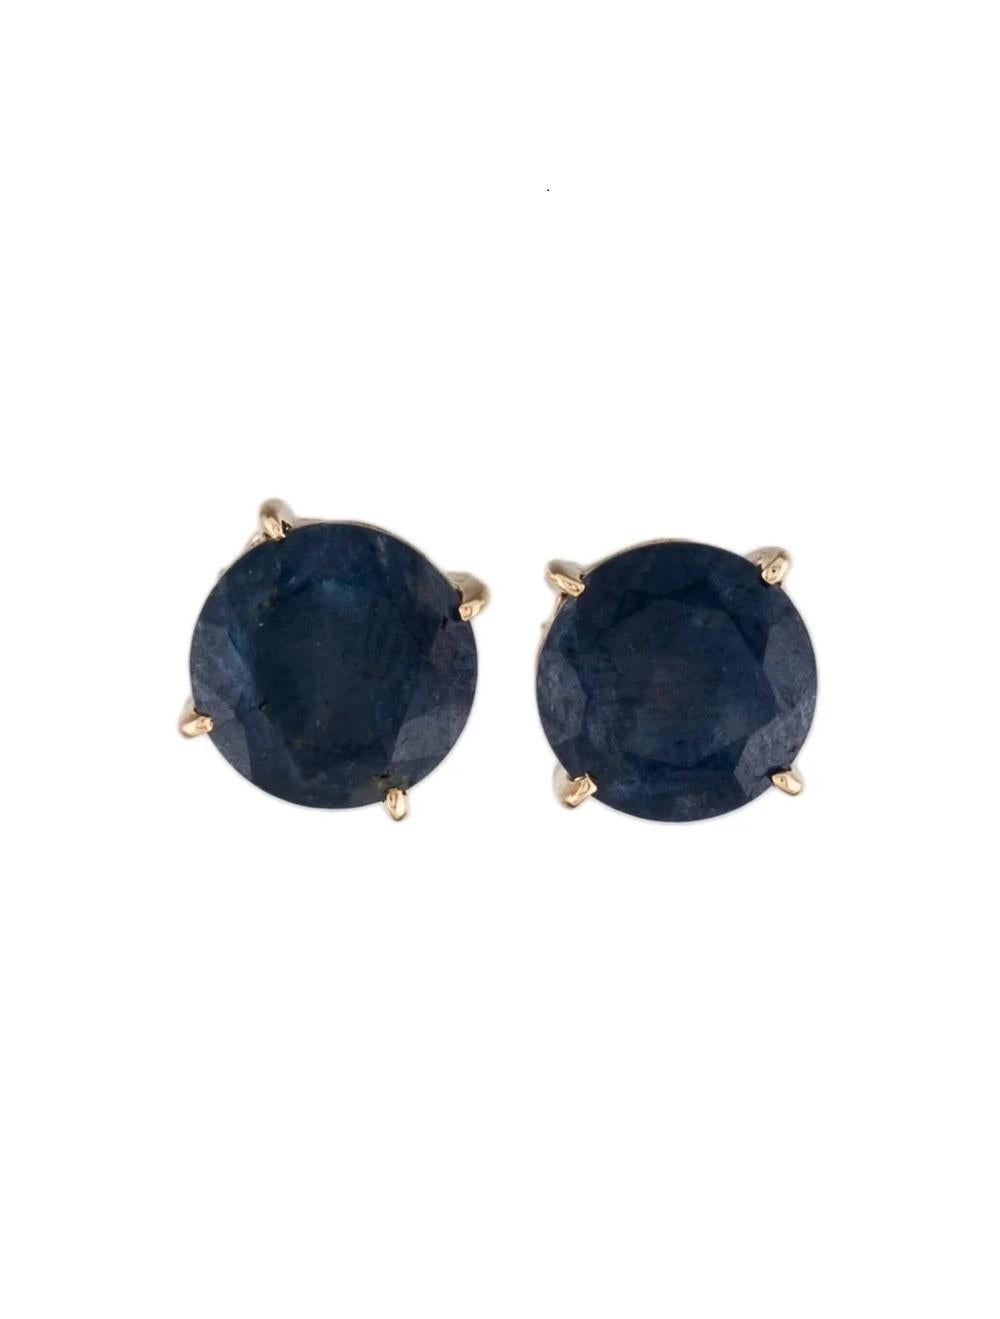 14K 4.51ctw Sapphire Stud Earrings - Timeless Elegance in Yellow Gold In New Condition For Sale In Holtsville, NY